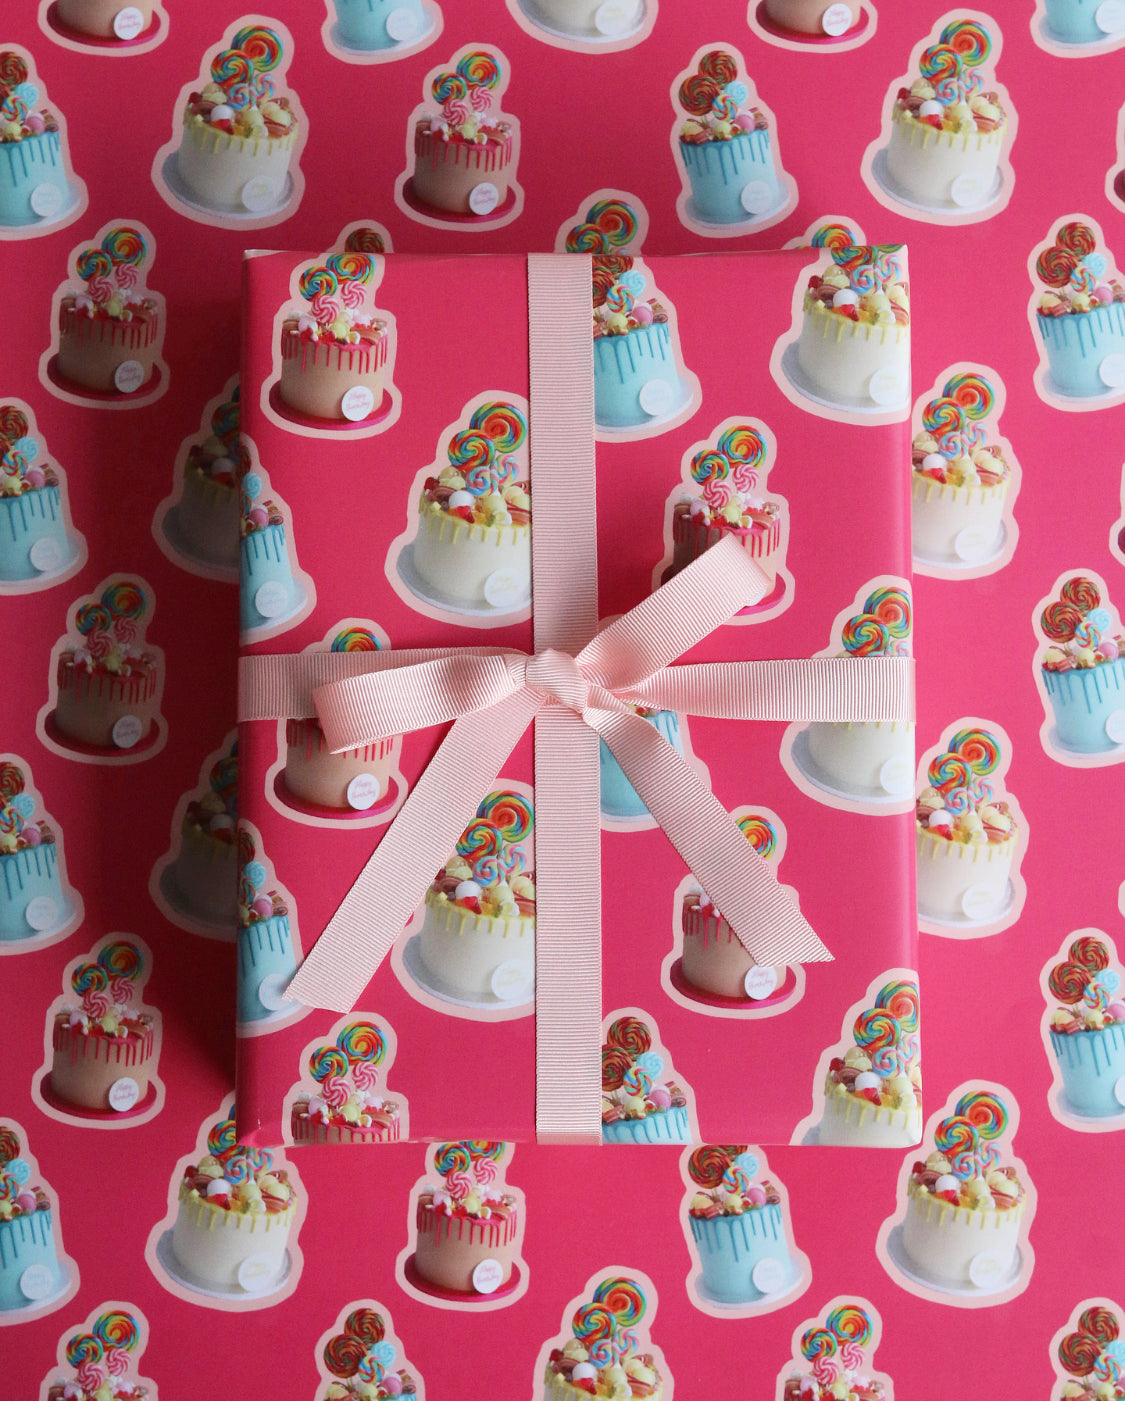 Sweetie Cake Pink Wrapping Paper tied with Ribbon